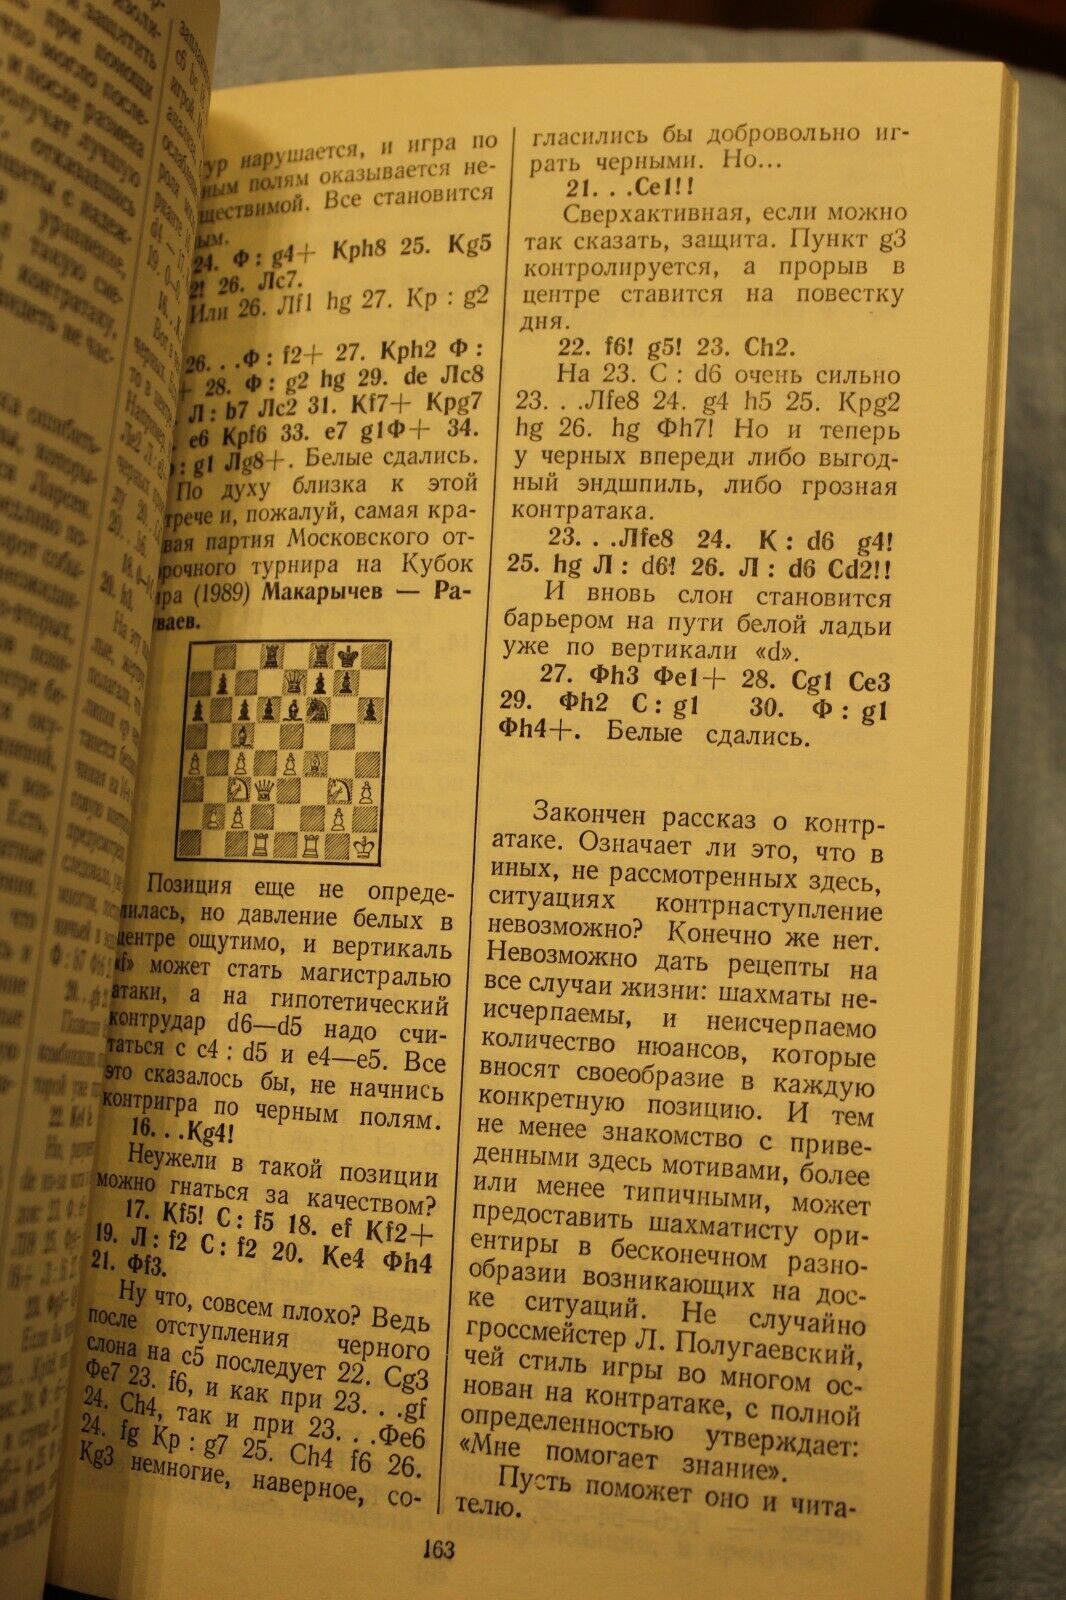 11116.Chess book: Signed by Y. Damsky, Last Chance, 1990